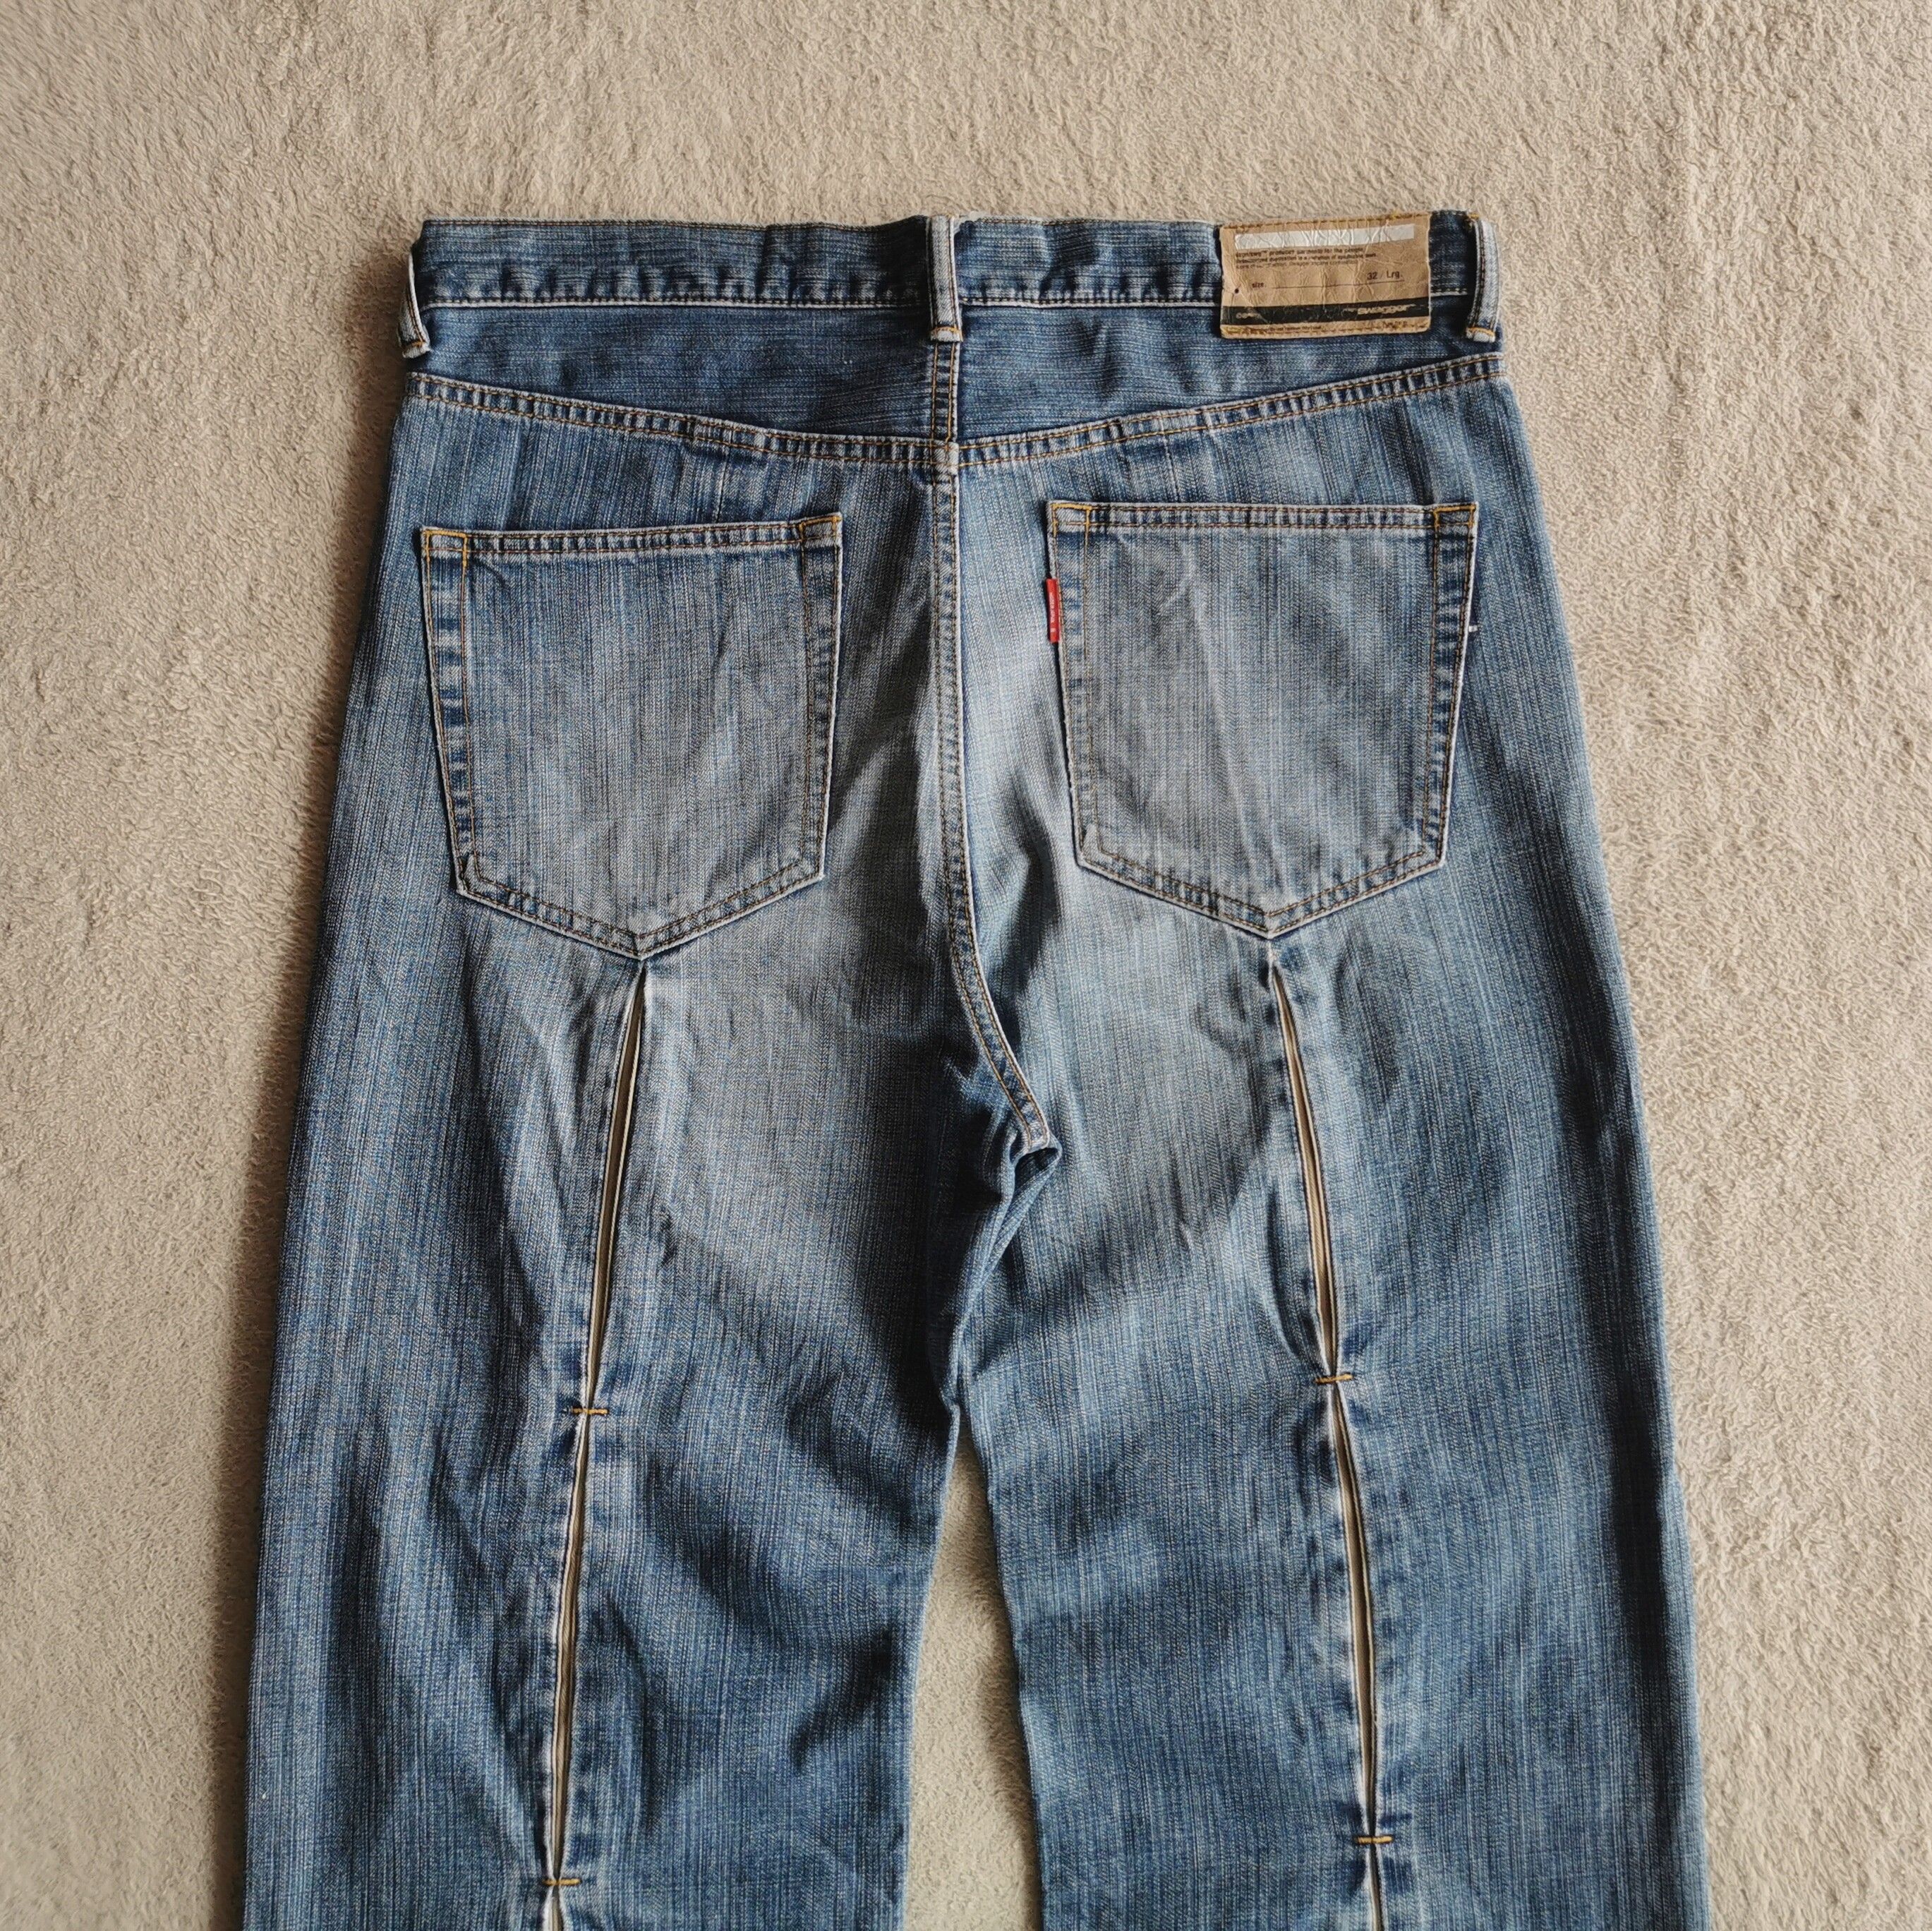 Japanese Brand 2004 Swagger Japan Jeans | Grailed